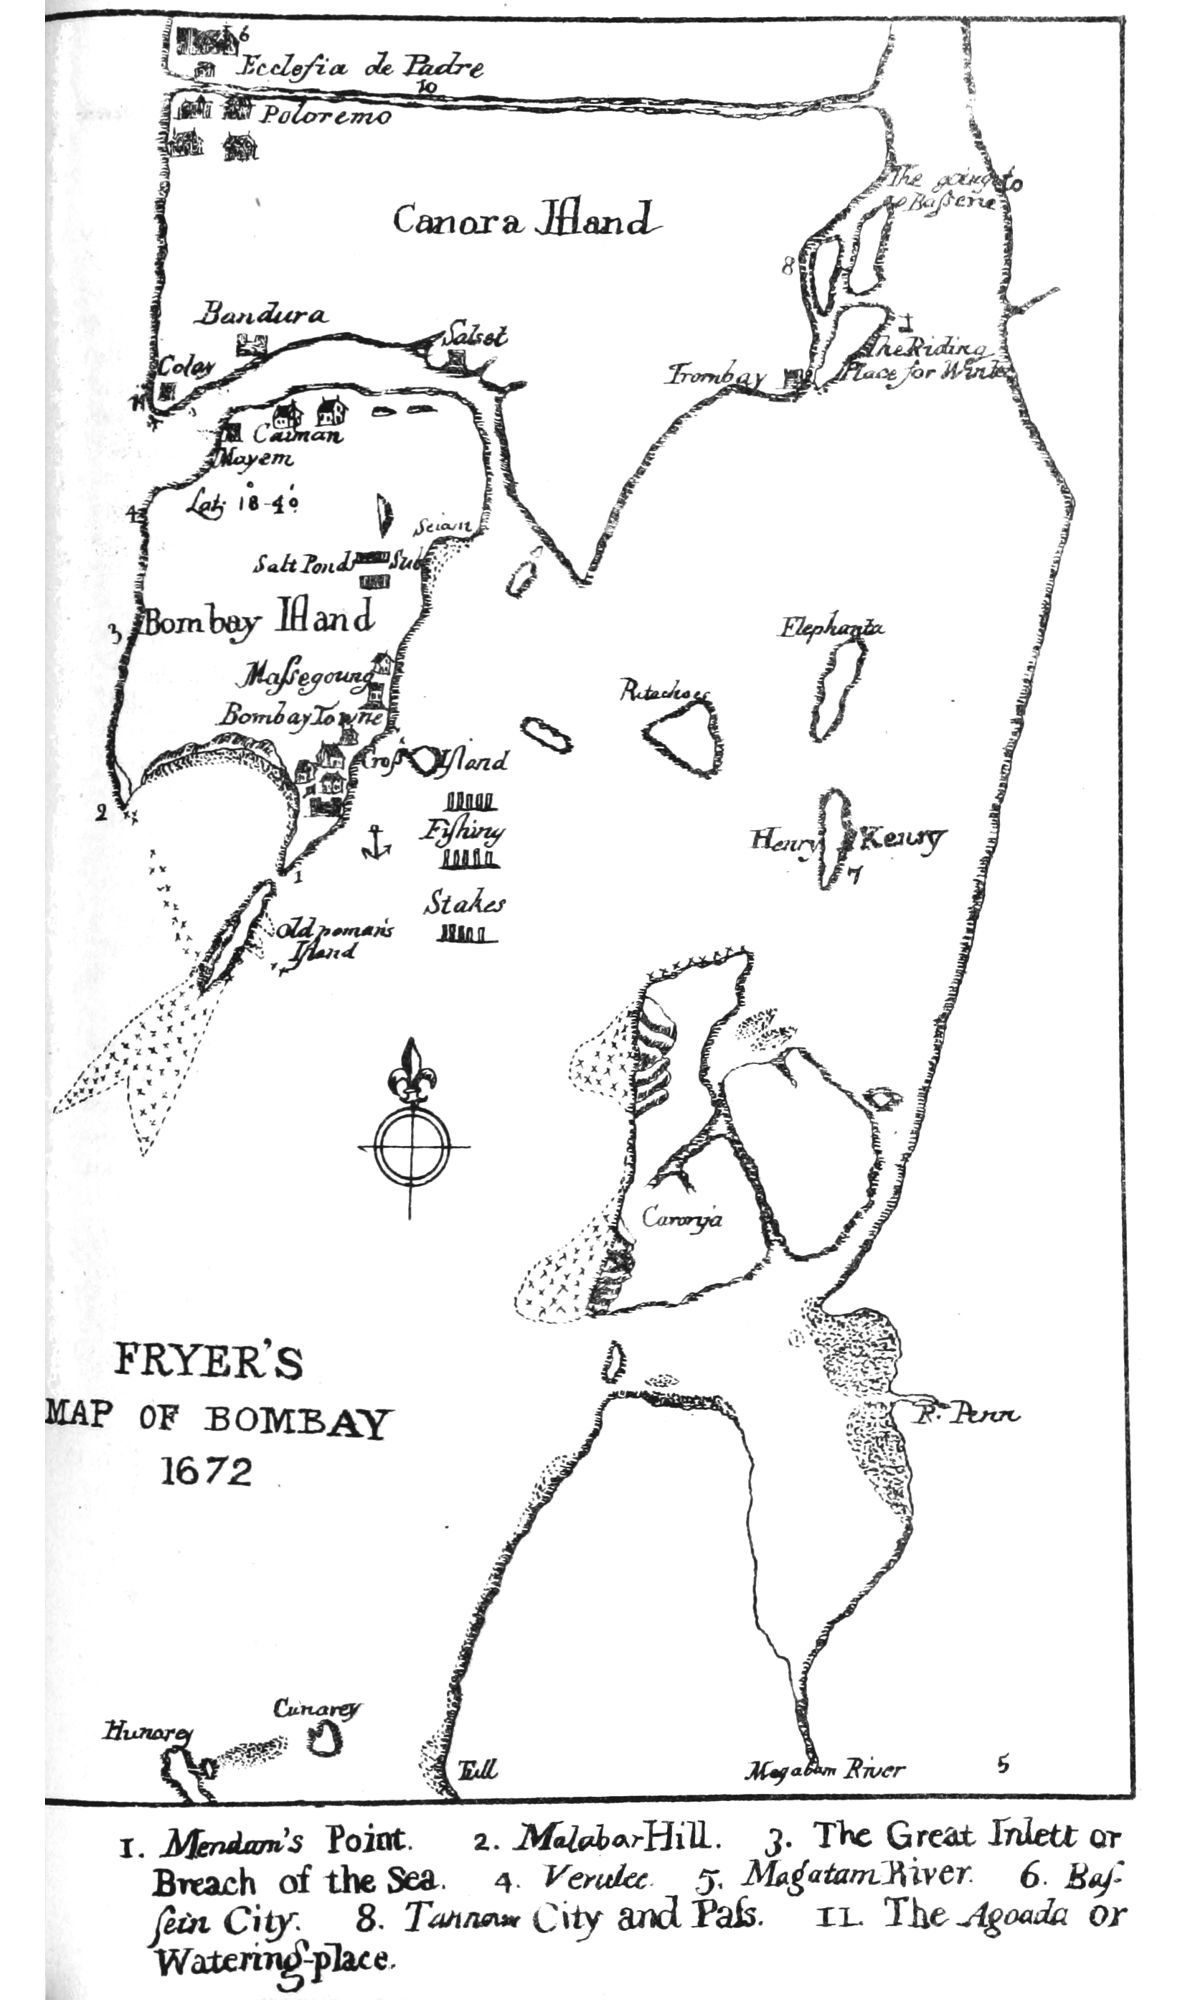 Map of Bombay in 1672